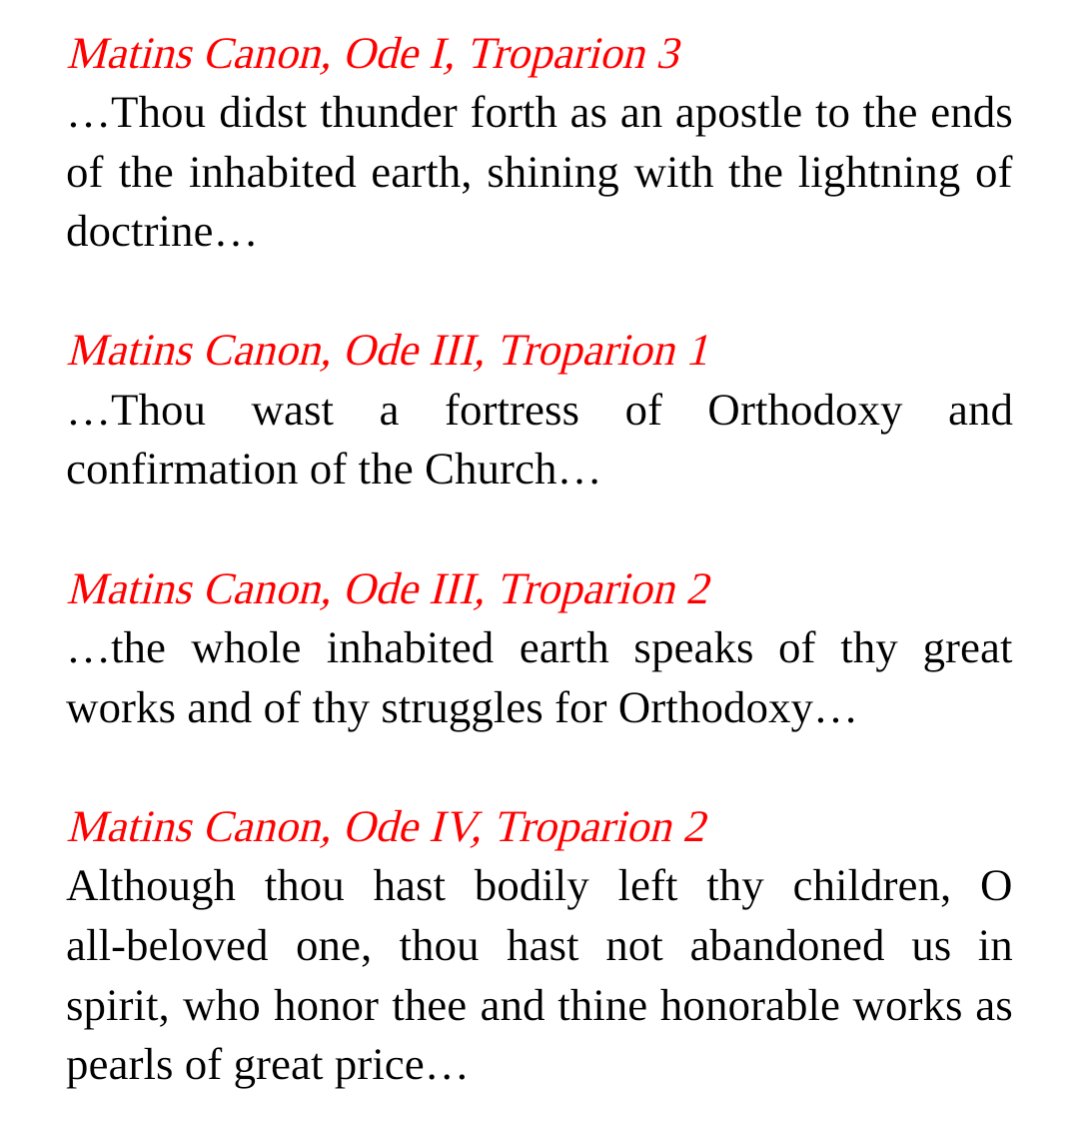 His writings are also praised more broadly, with allusions to his sermons for saints' feastdays, his works on monasticism and the good of marriage, and others. Here are some example hymns and excerpts: